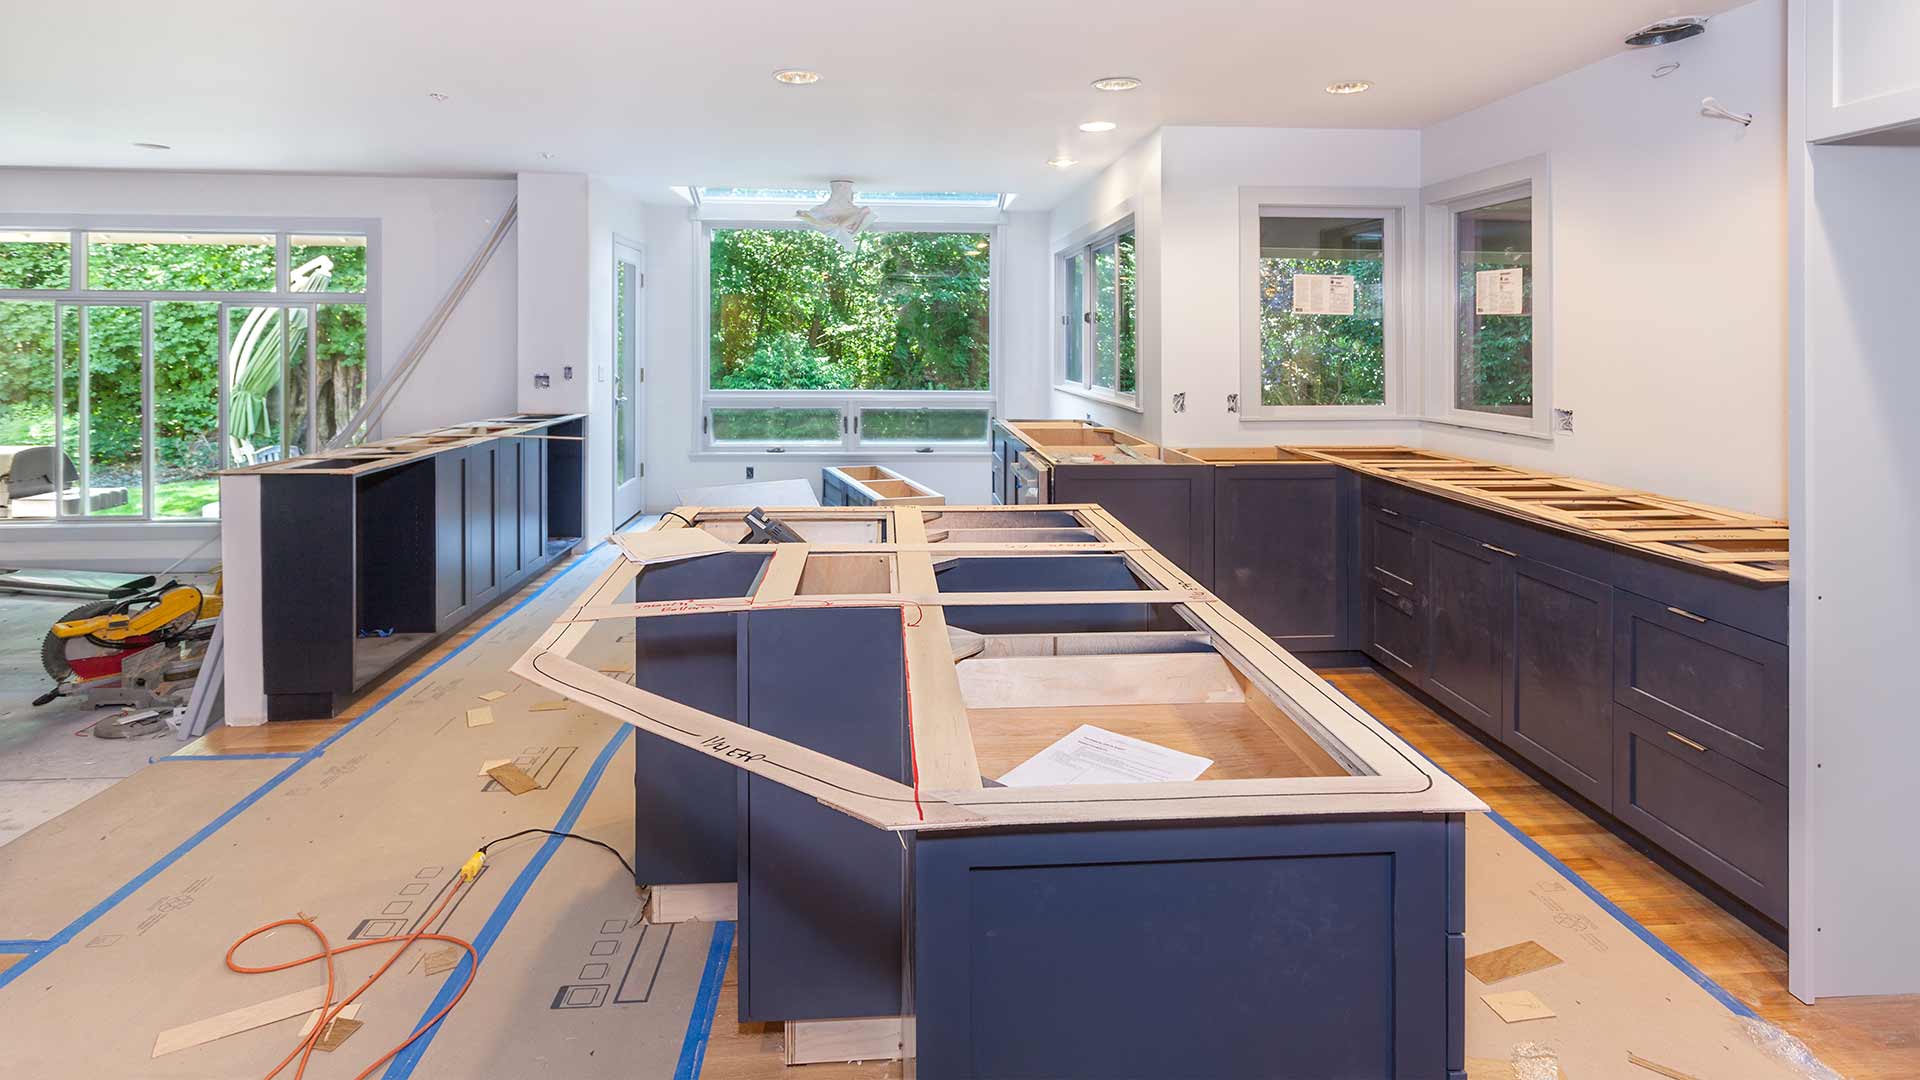 We offer top rated remodeling of kitchens, bathrooms, and other spaces in the home for residents in Central Florida, including Plant City, Lakeland, Winter Haven, and surrounding areas.